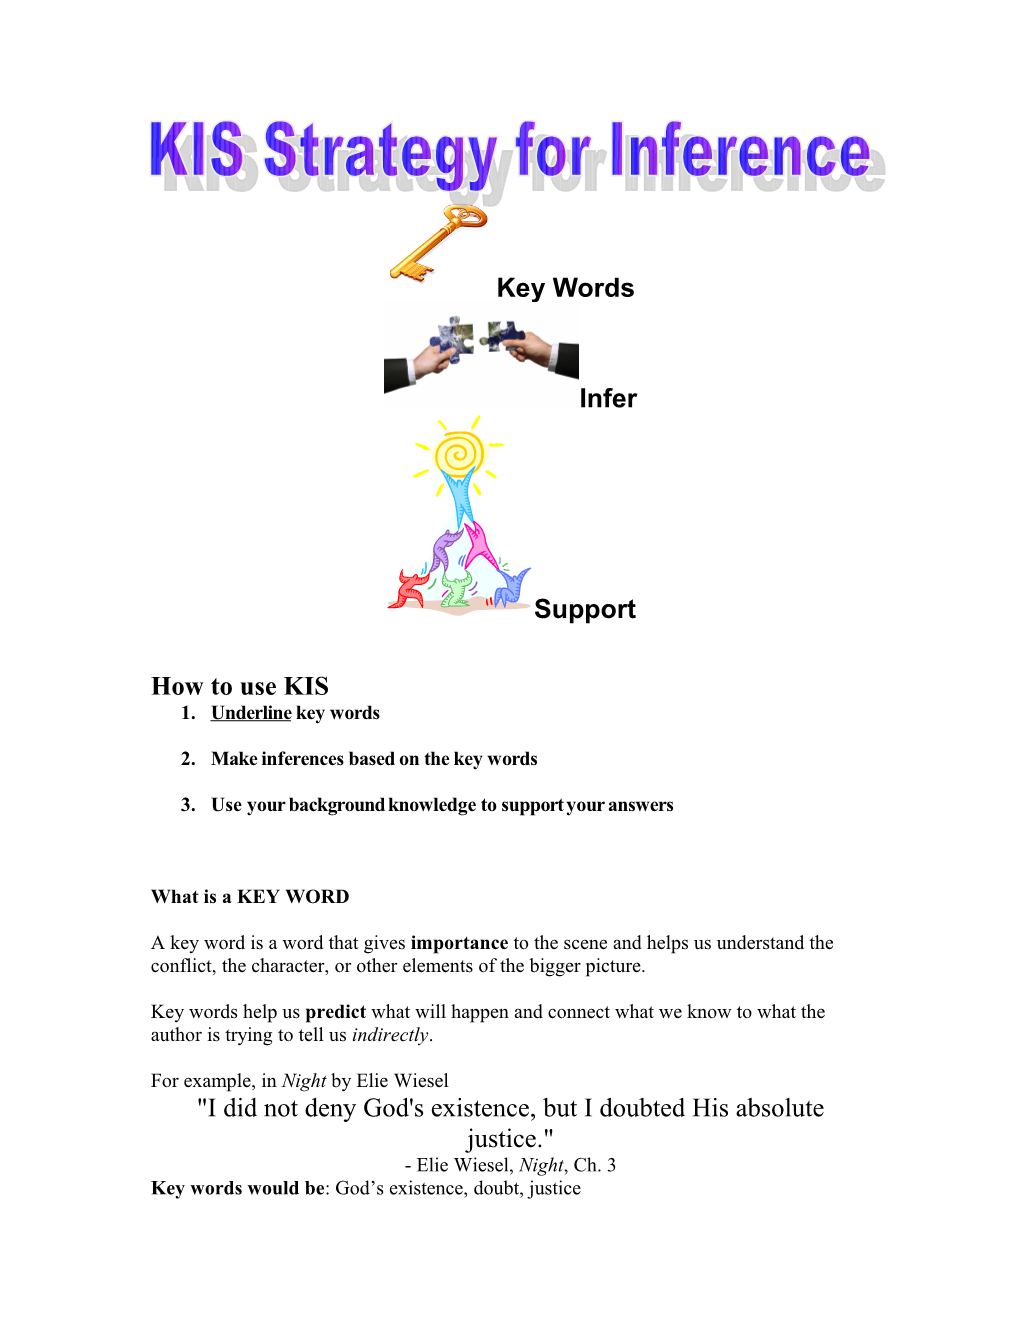 KIS Strategy for Inference